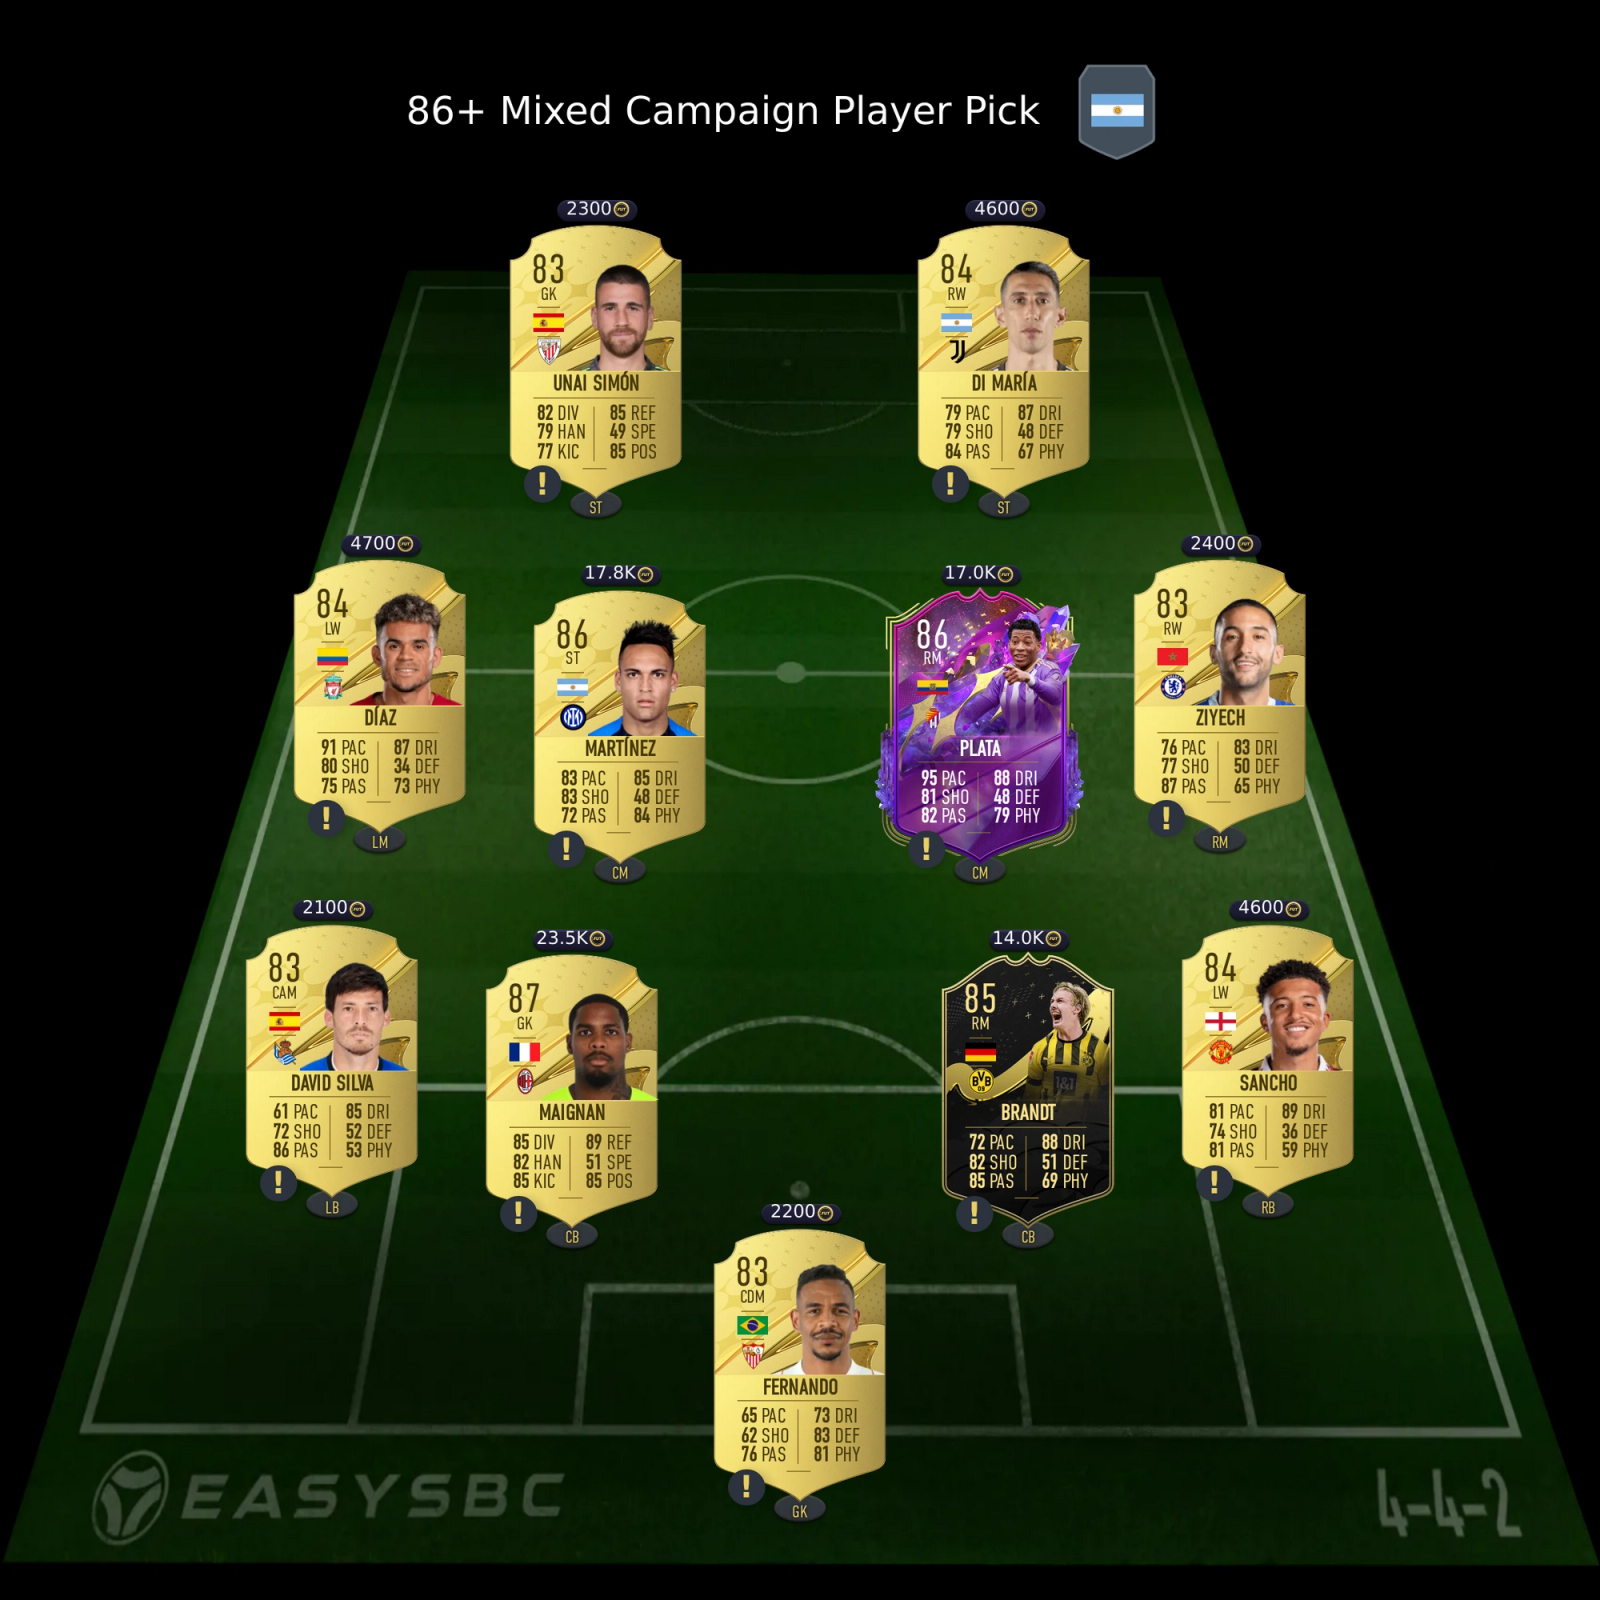 86+-mixed-campaign-player-pick-sbc-solution